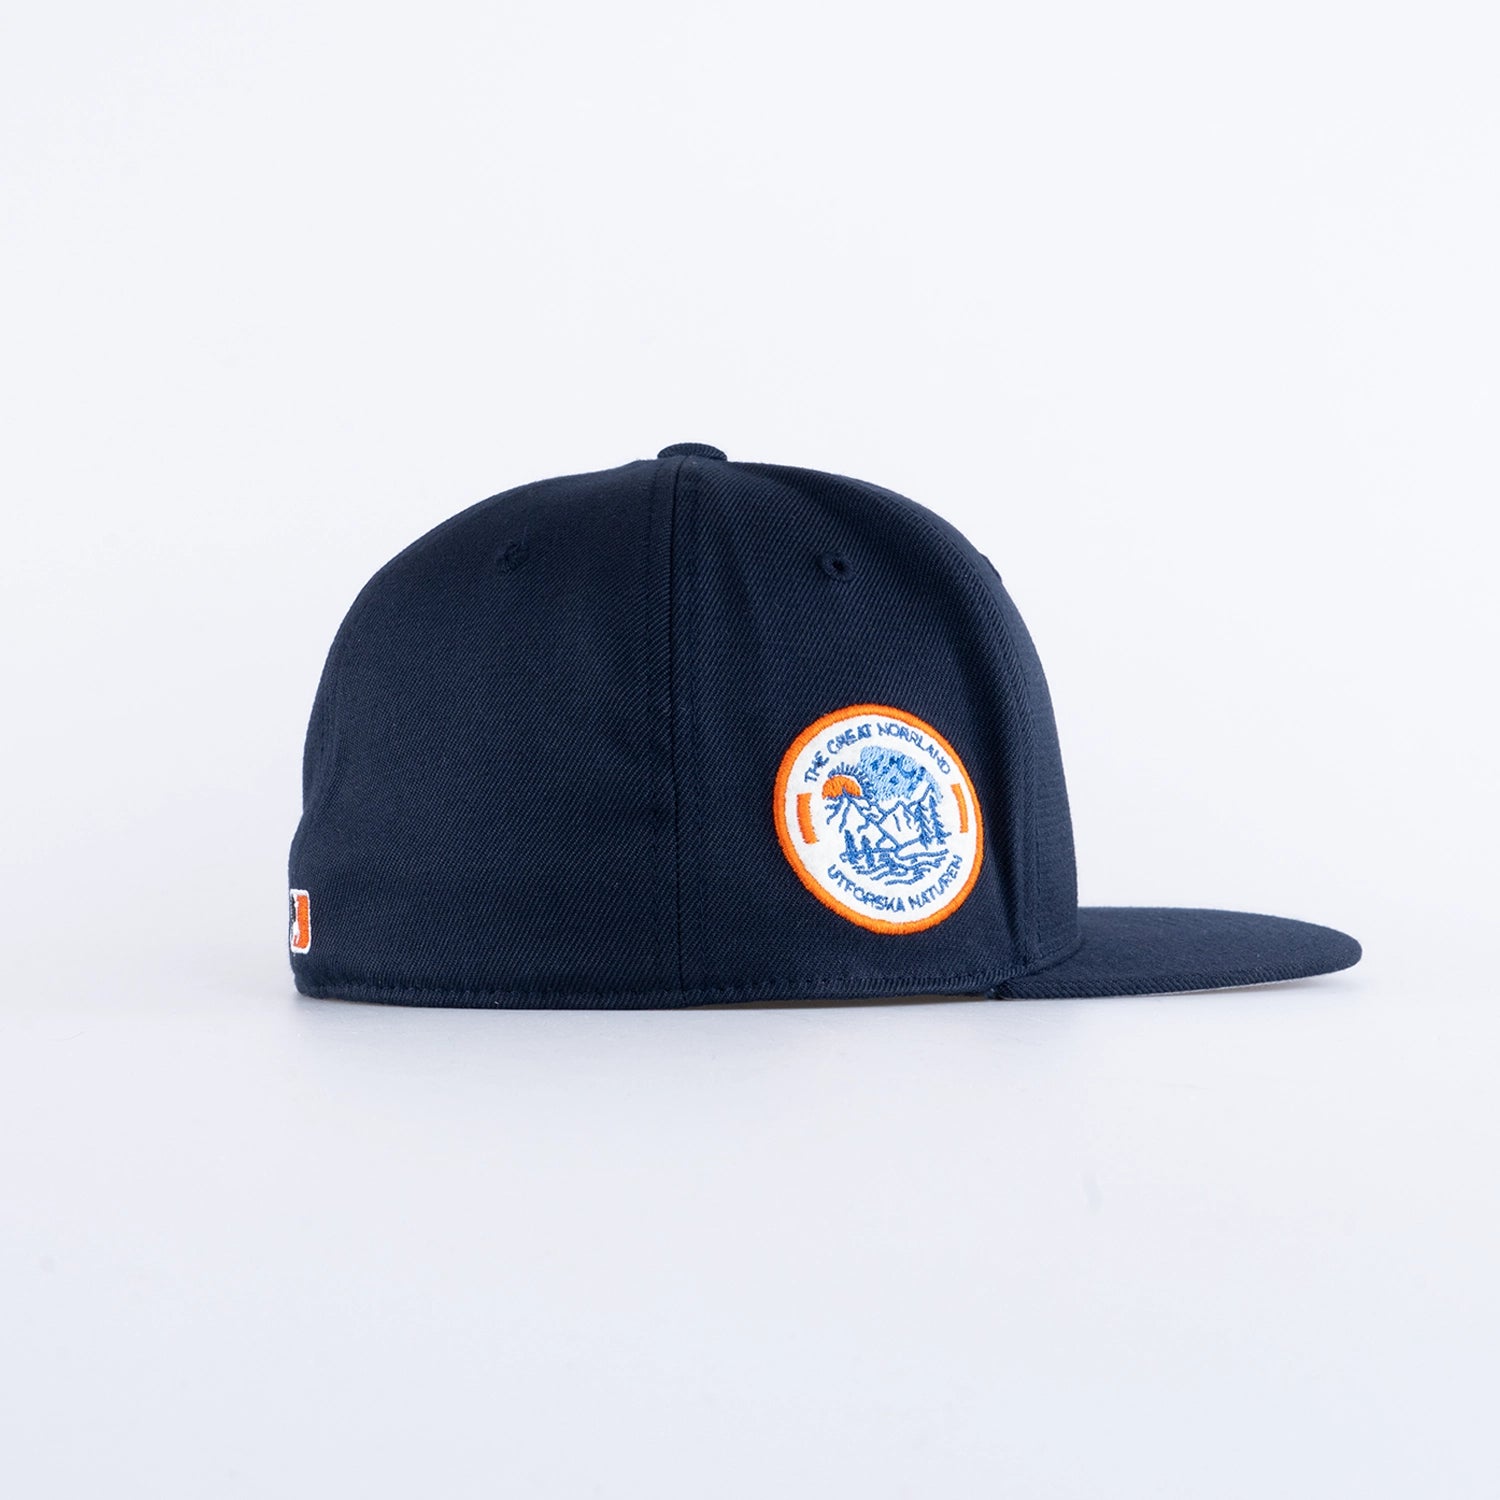 ATHLETIC FITTED CAP - NAVY